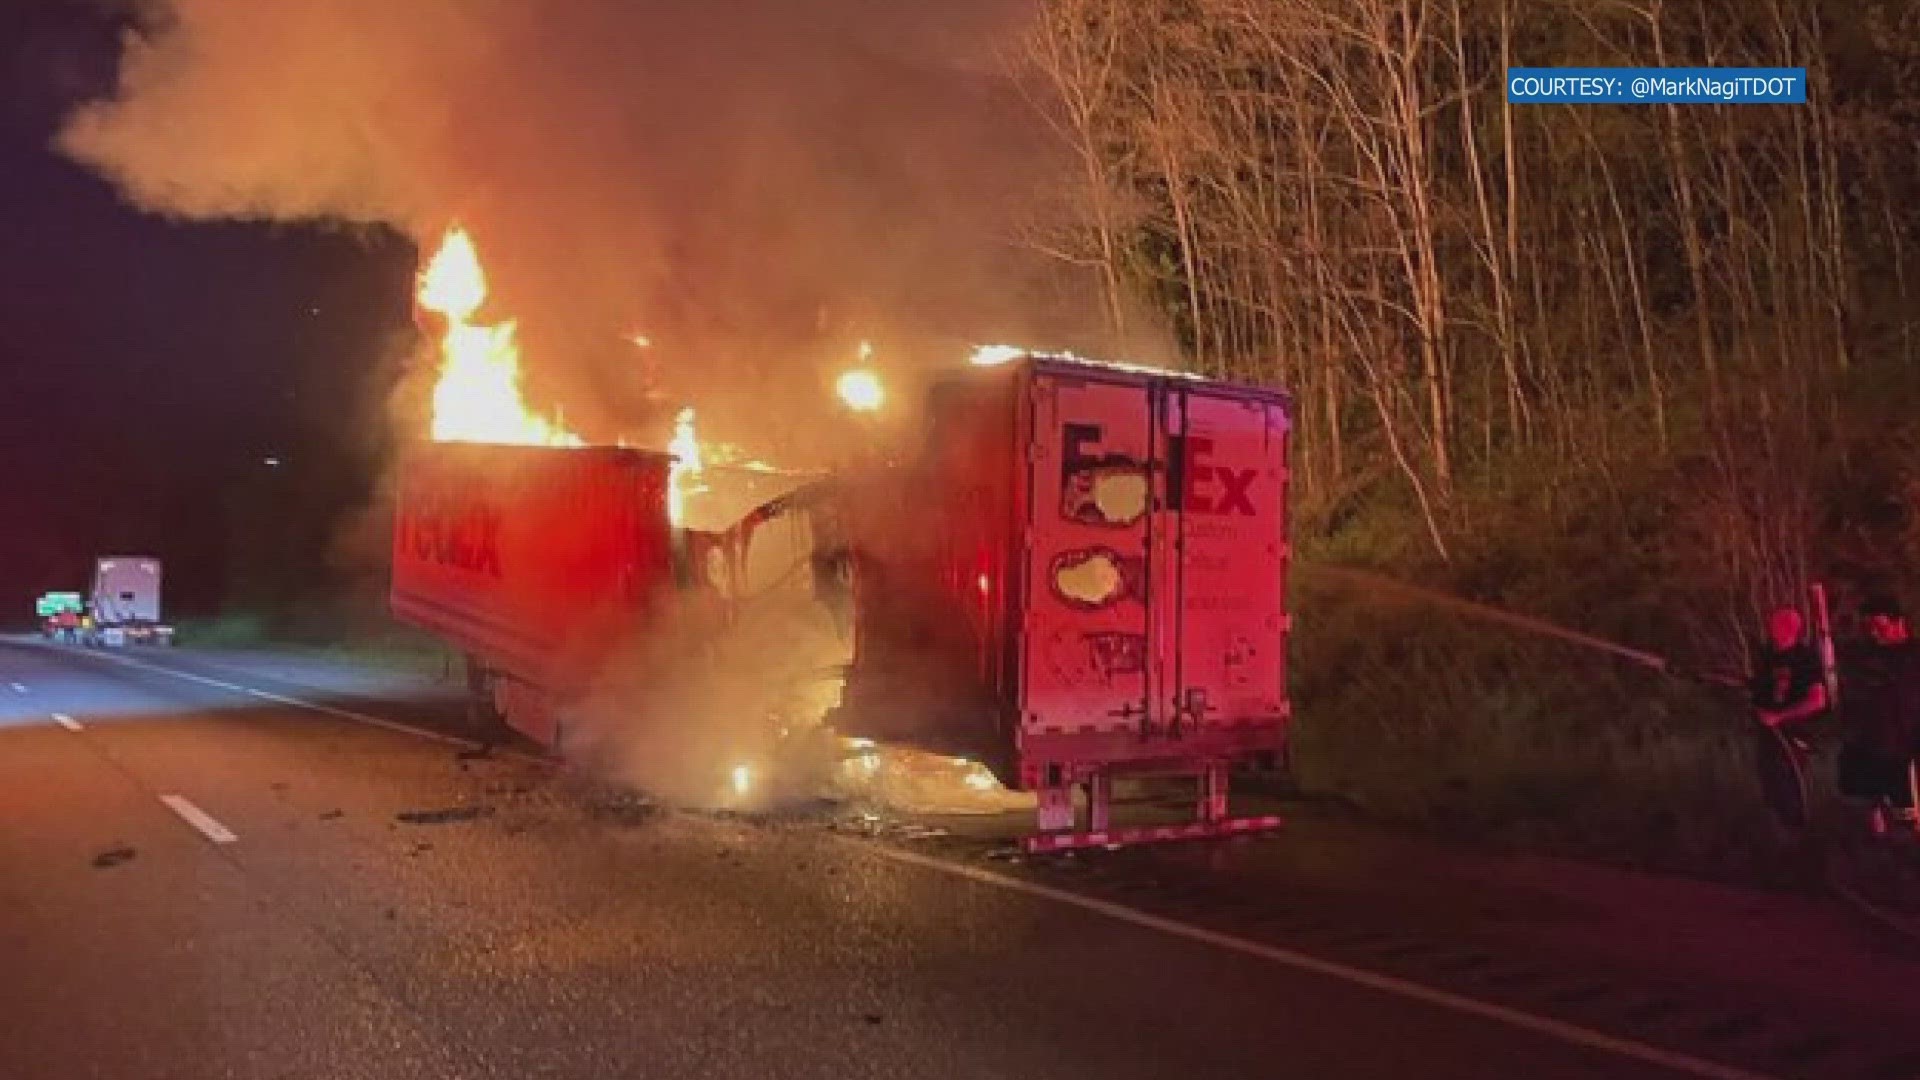 The Tennessee Department of Transportation said the fire was reported at around 10:07 p.m. Eastern Time.